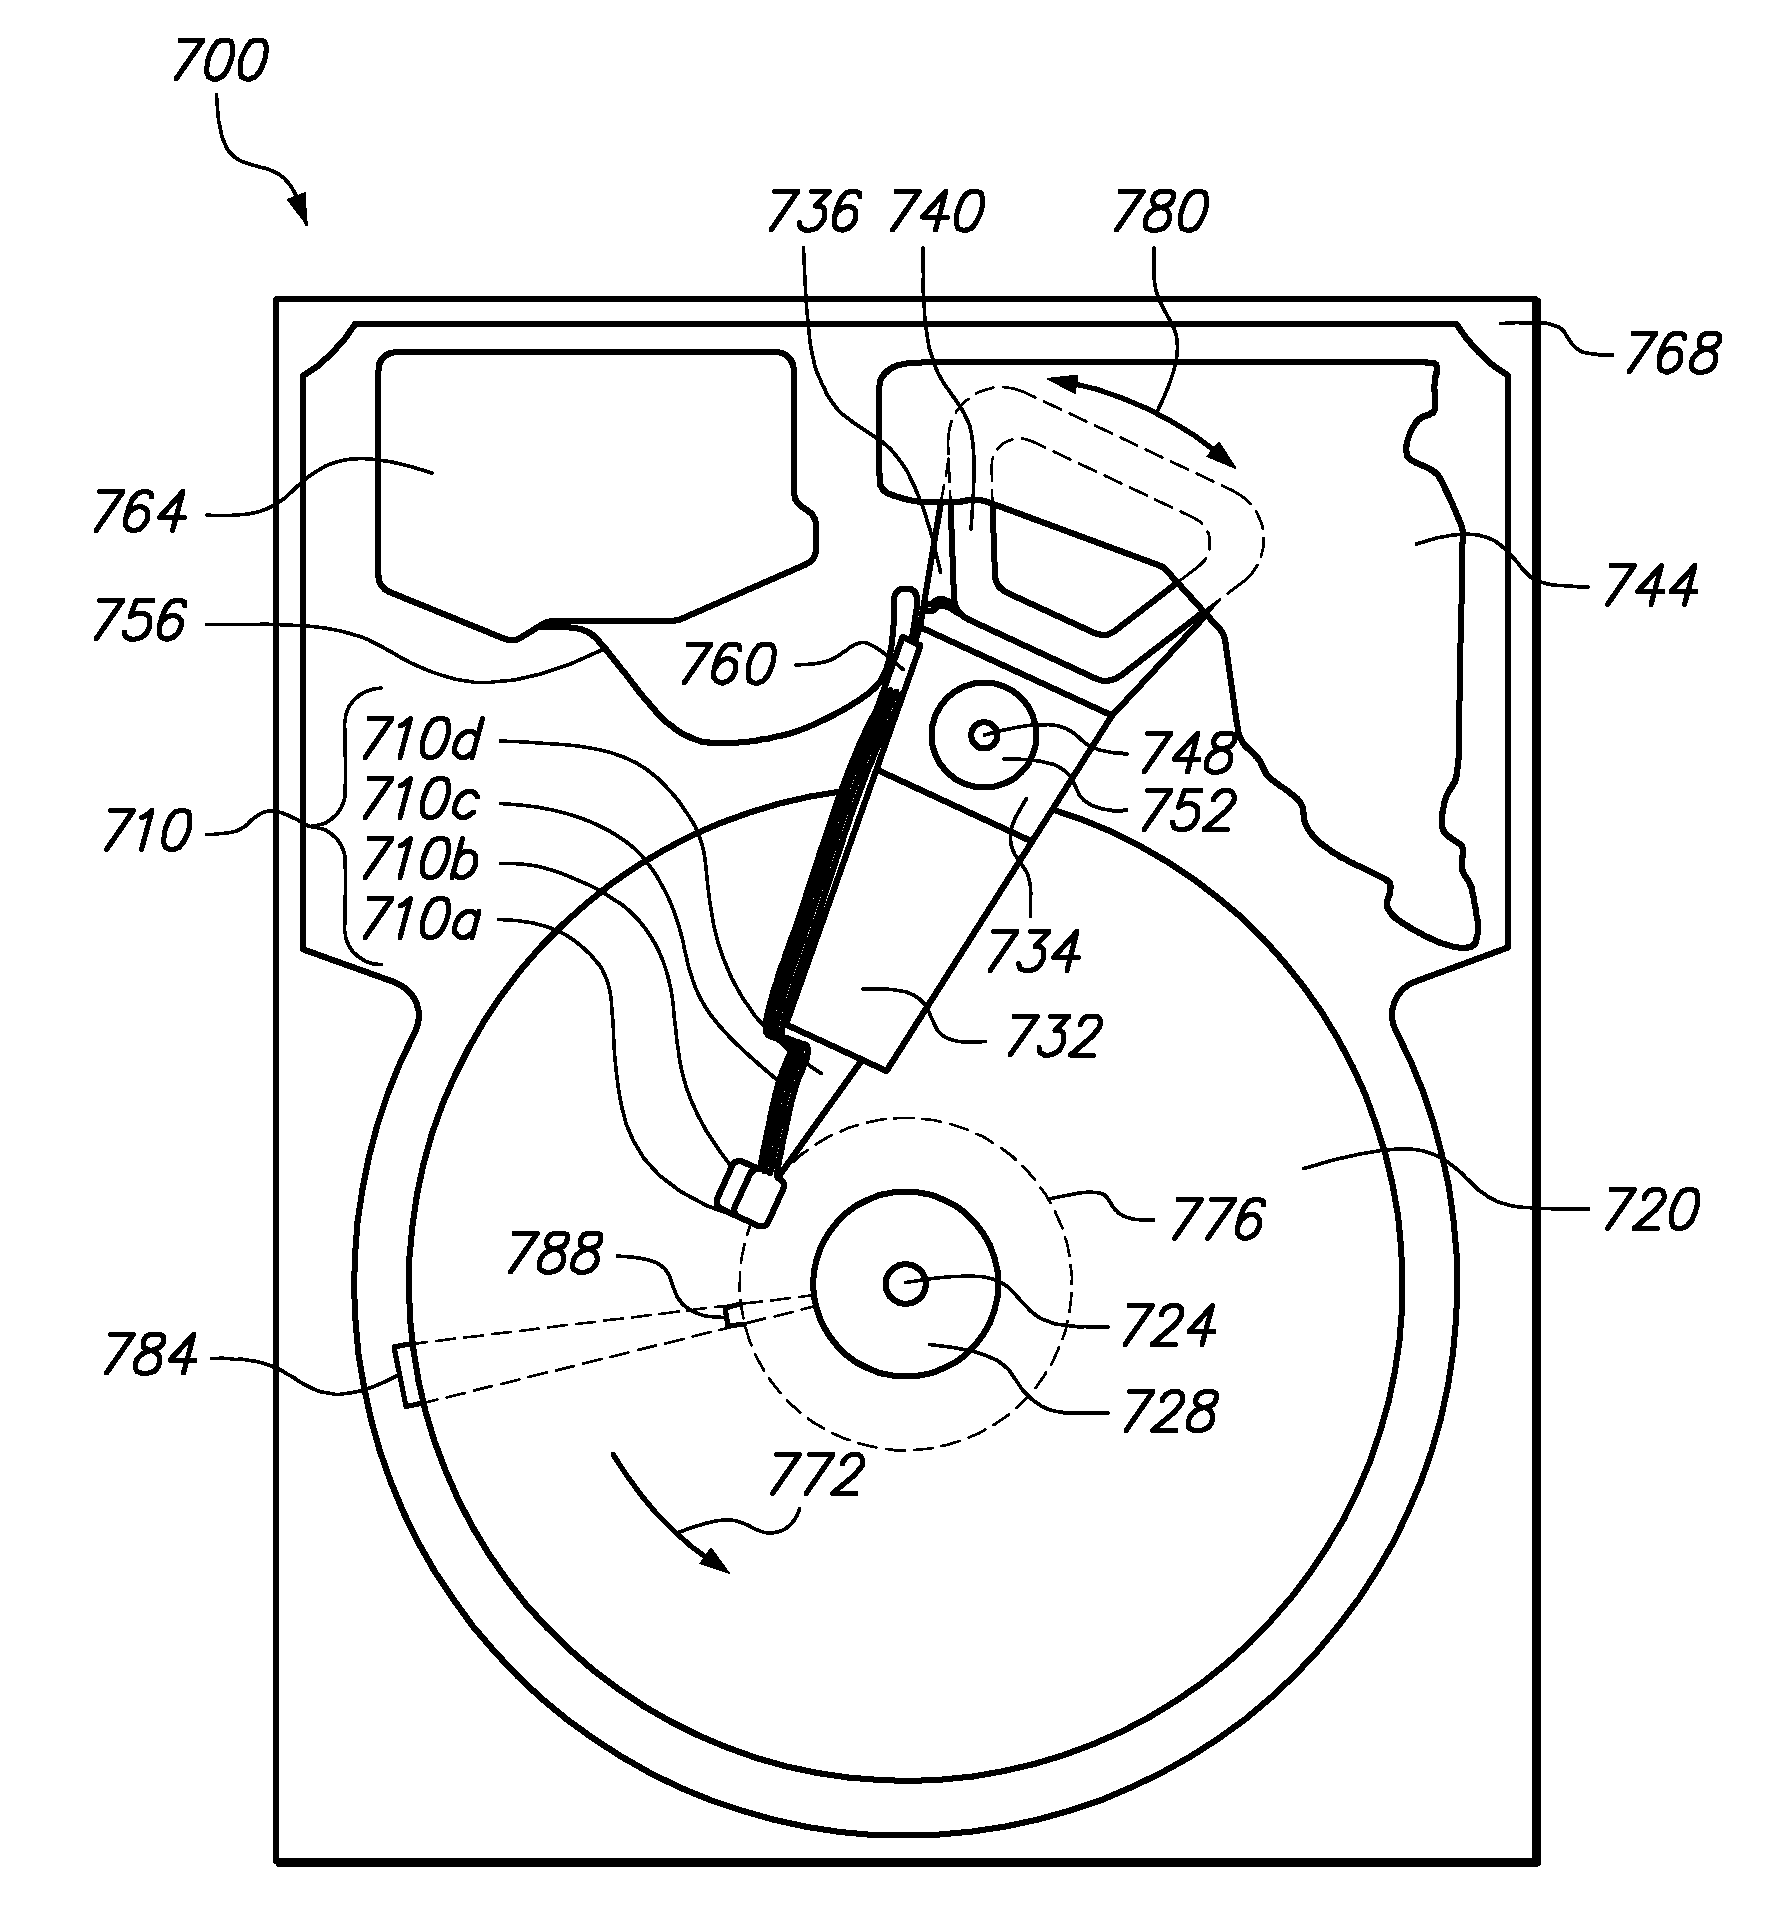 Airborne particle trap within an enclosure containing sensitive equipment